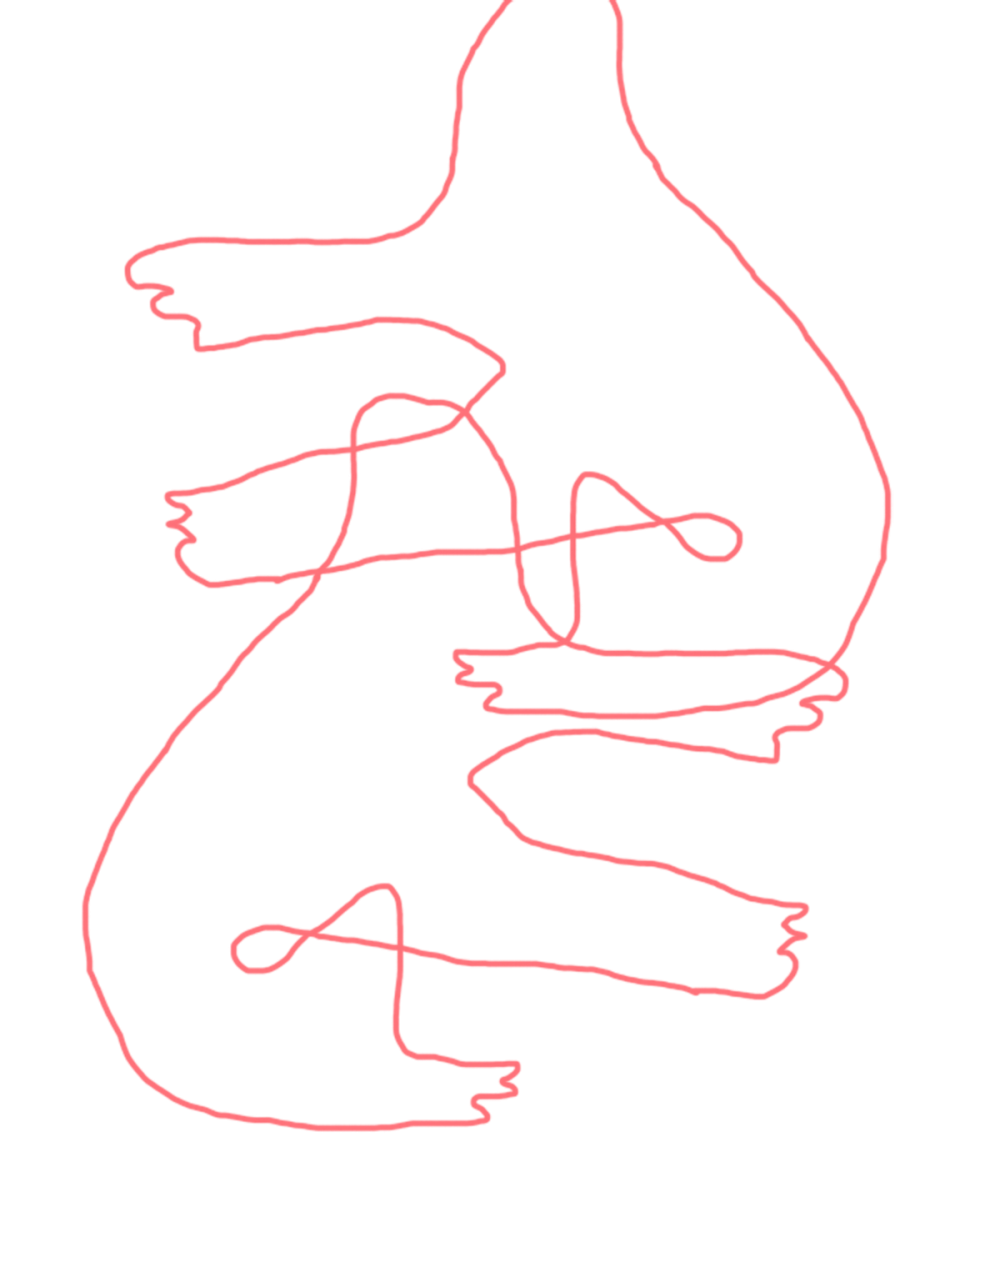 An abstract red line drawing of two figures. The first figure is crouching, reaching its arms out in front. The second figure is in the same pose, facing the opposite direction, and is hovering on top of the first figure, overlapping slightly.